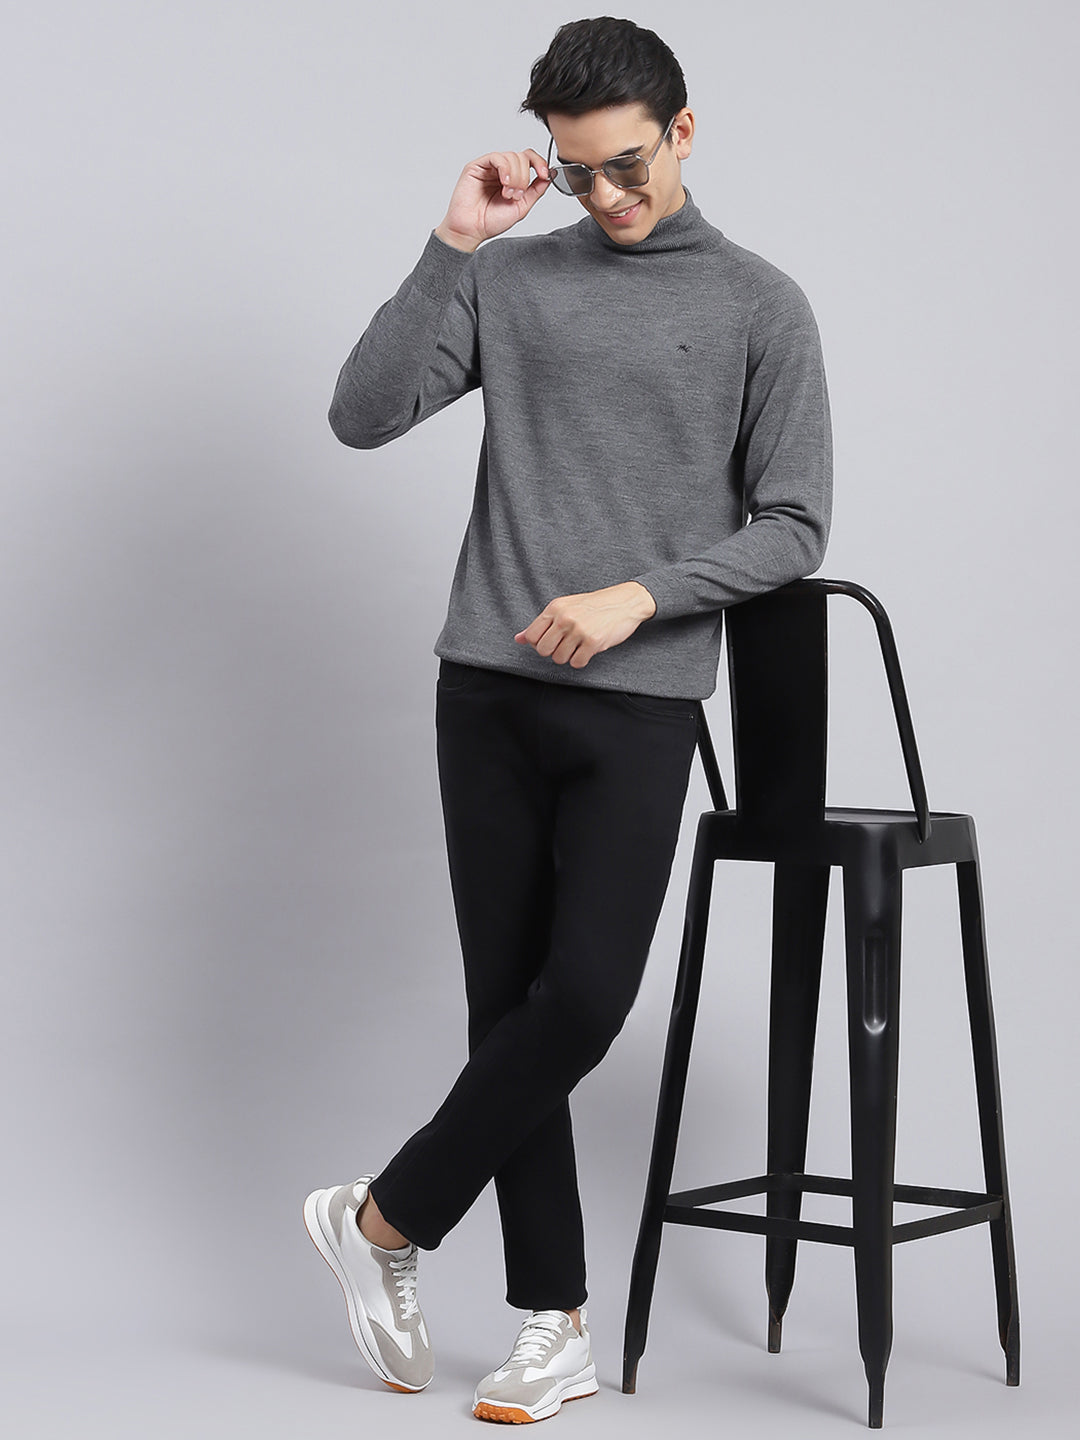 Black Turtleneck Men Knitted Sweater Classic Solid Color Casual